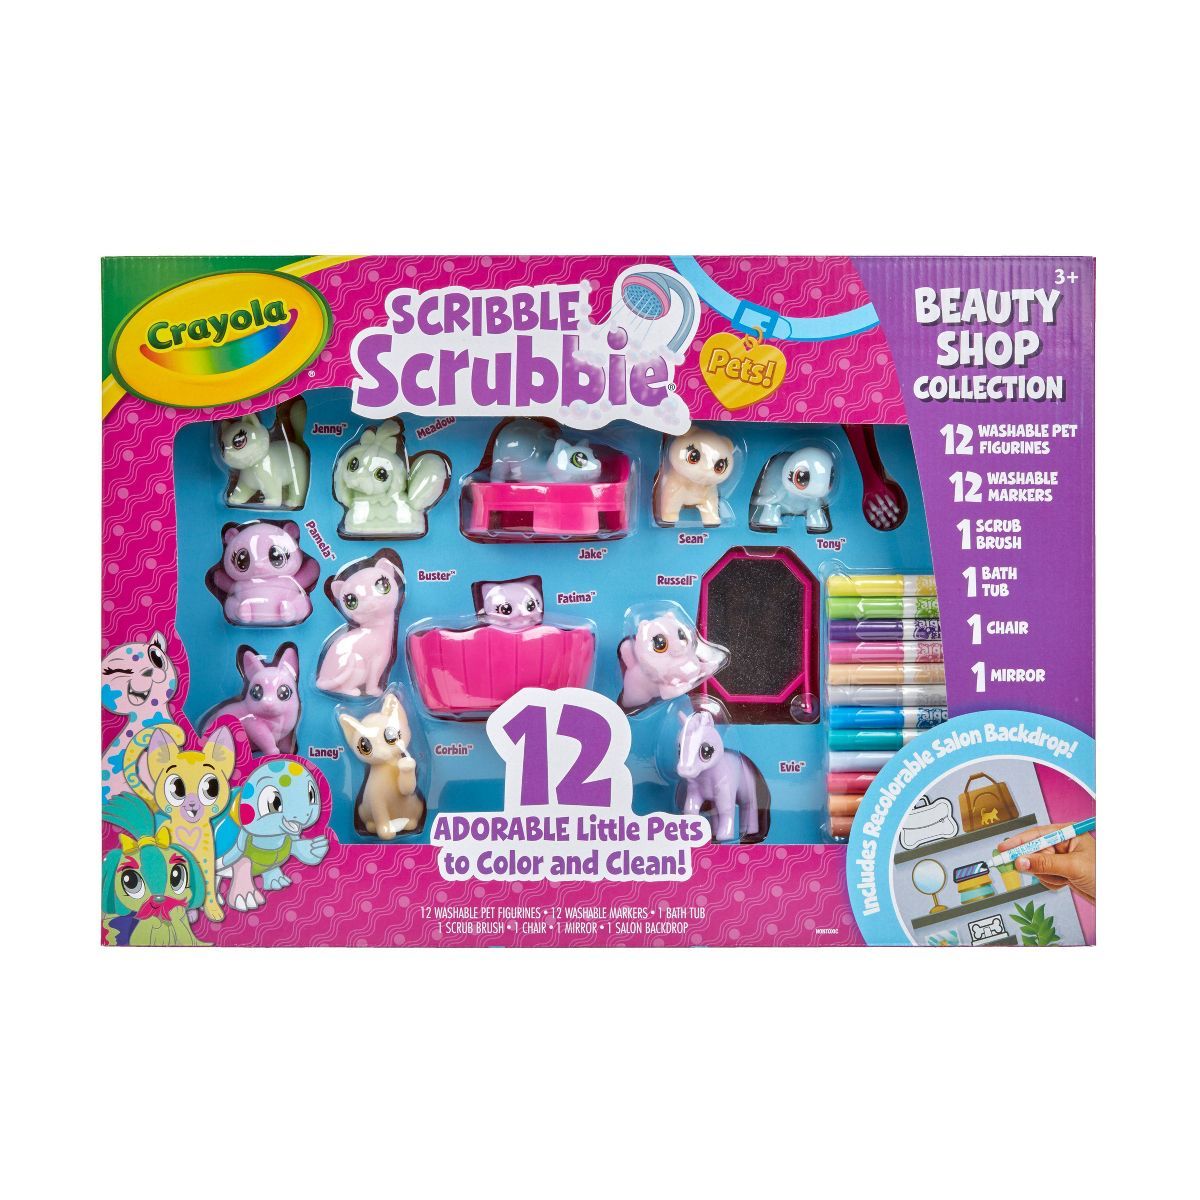 Crayola Scribble Scrubbie Pets Beauty Shop Drawing and Coloring Kit | Target